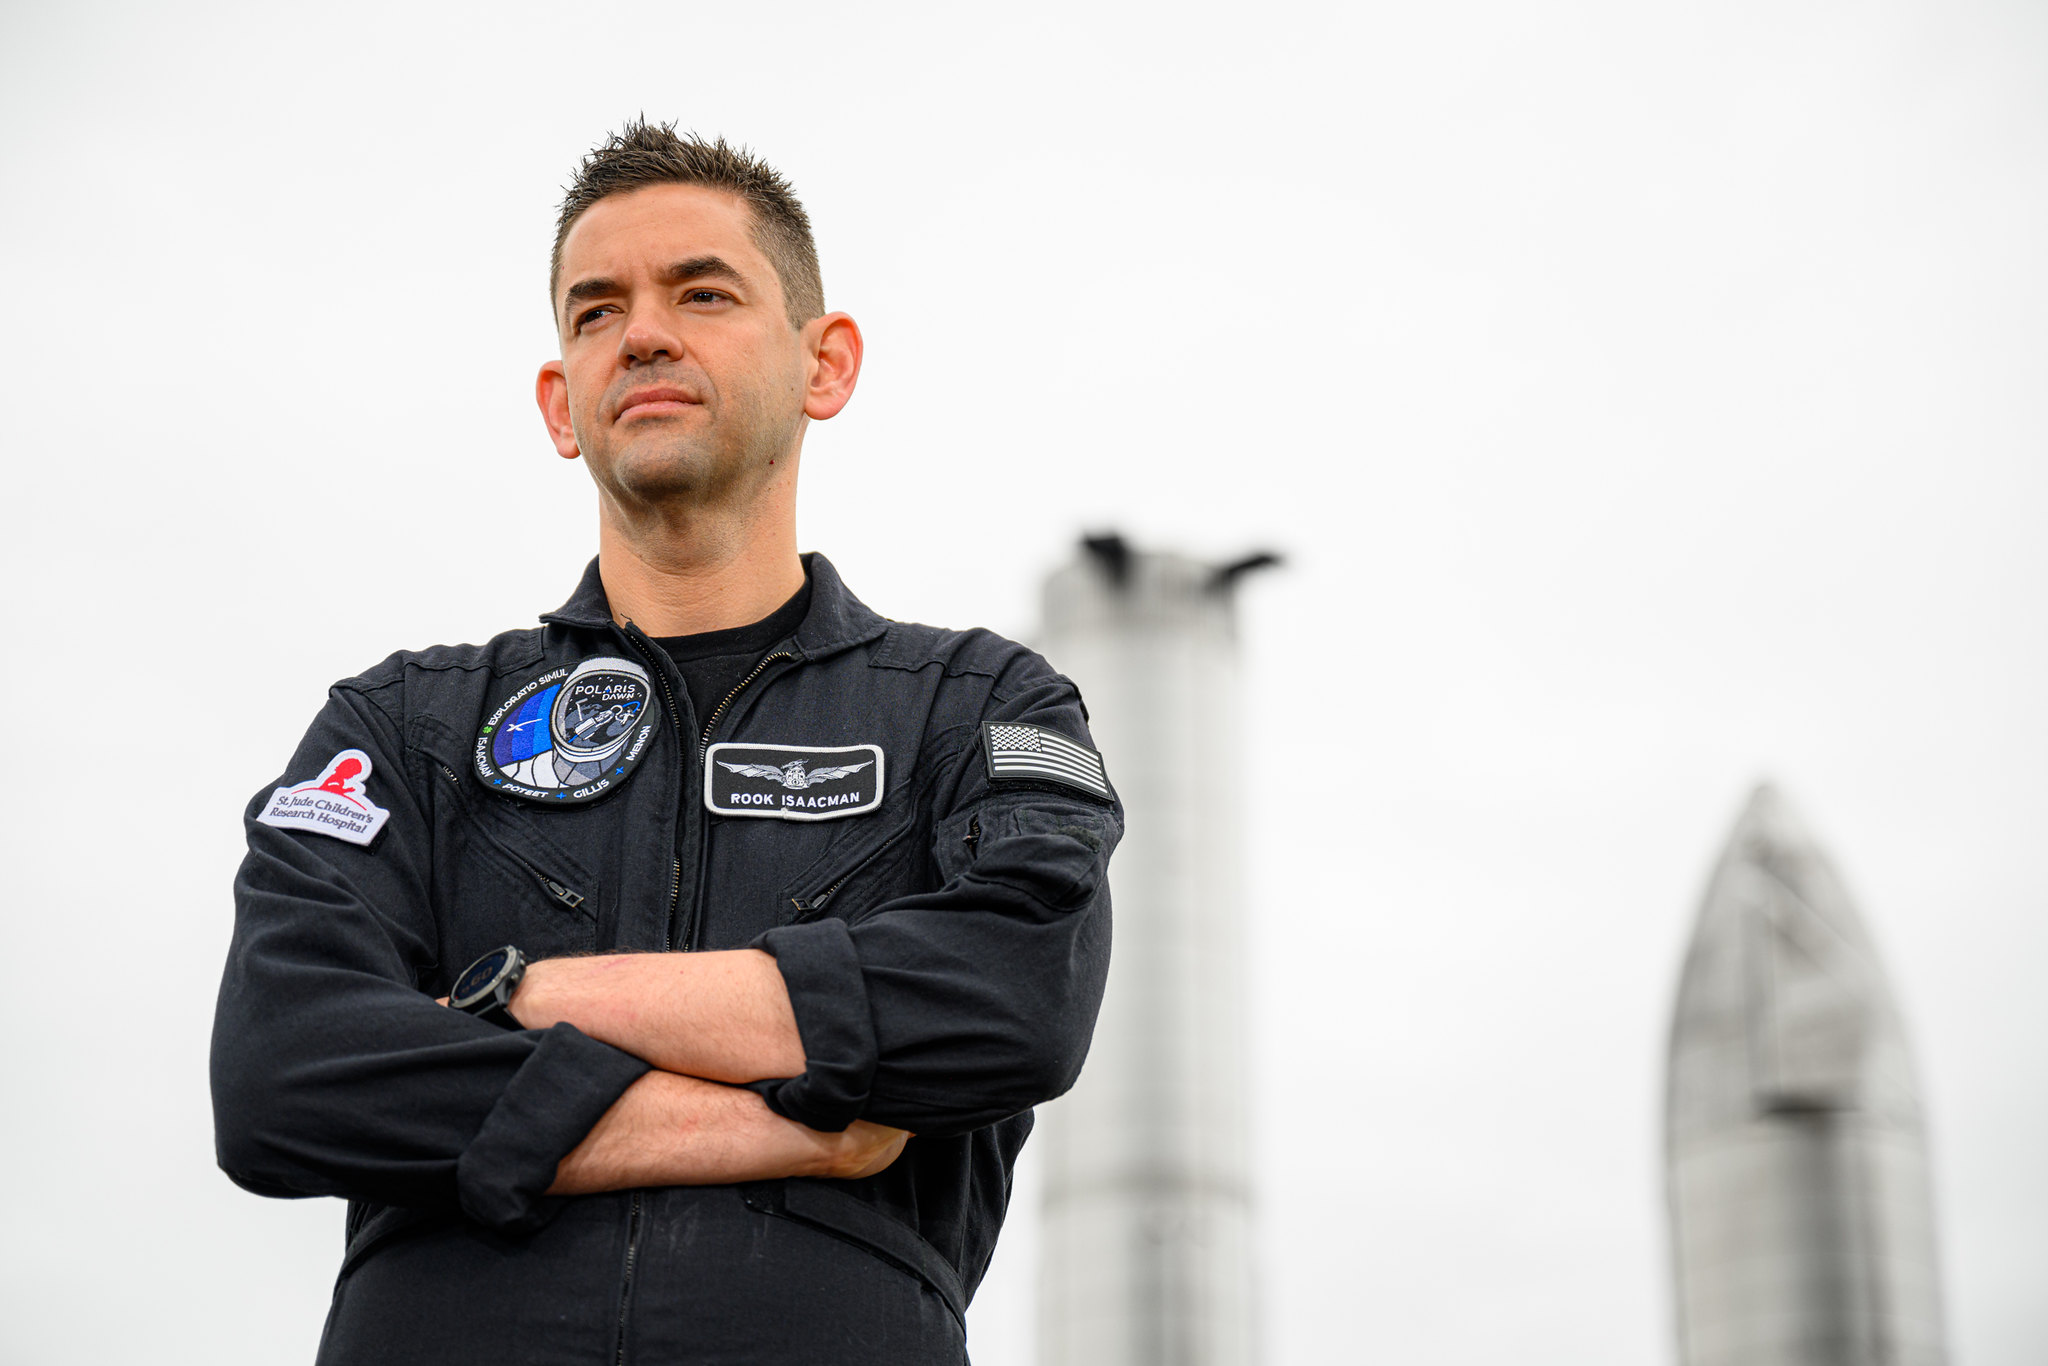 Billionaire Jared Isaacman will command the Polaris Dawn civilian astronaut mission on a SpaceX Dragon spacecraft in late 2022.